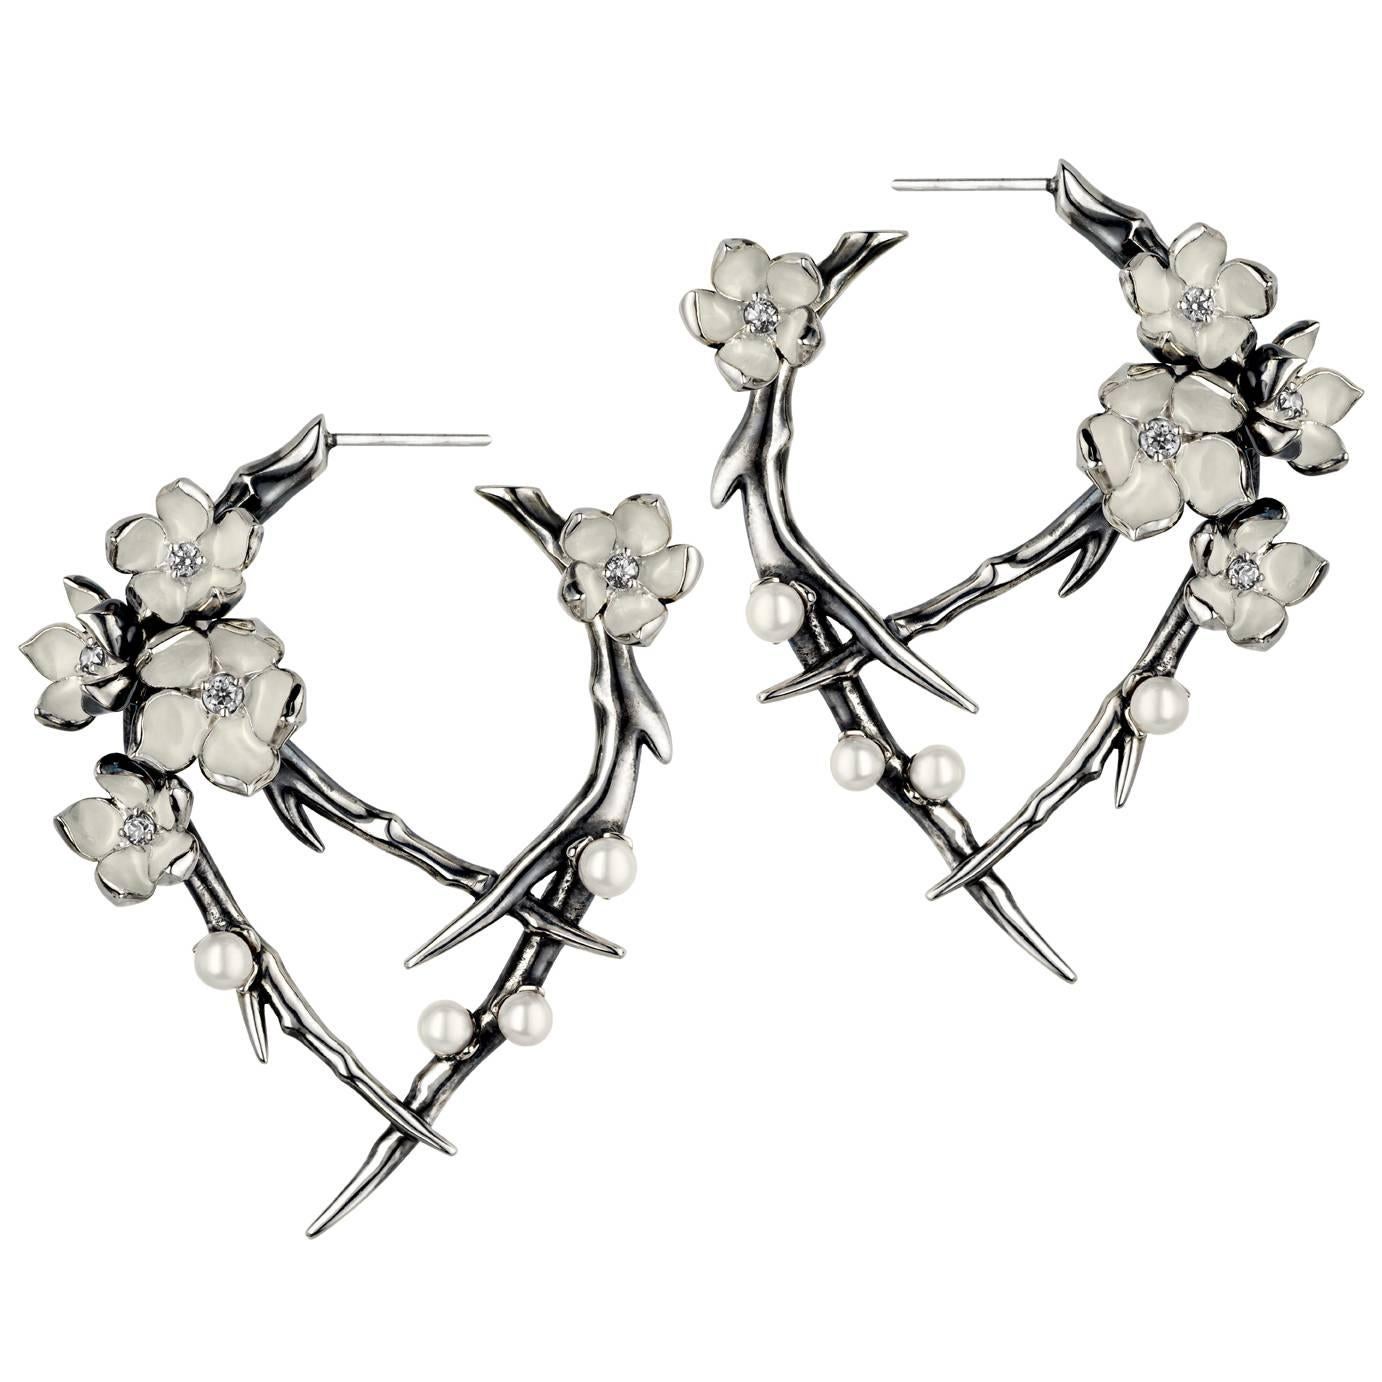 Diamond and Pearl Silver Cherry Blossom Earrings by Shaun Leane 